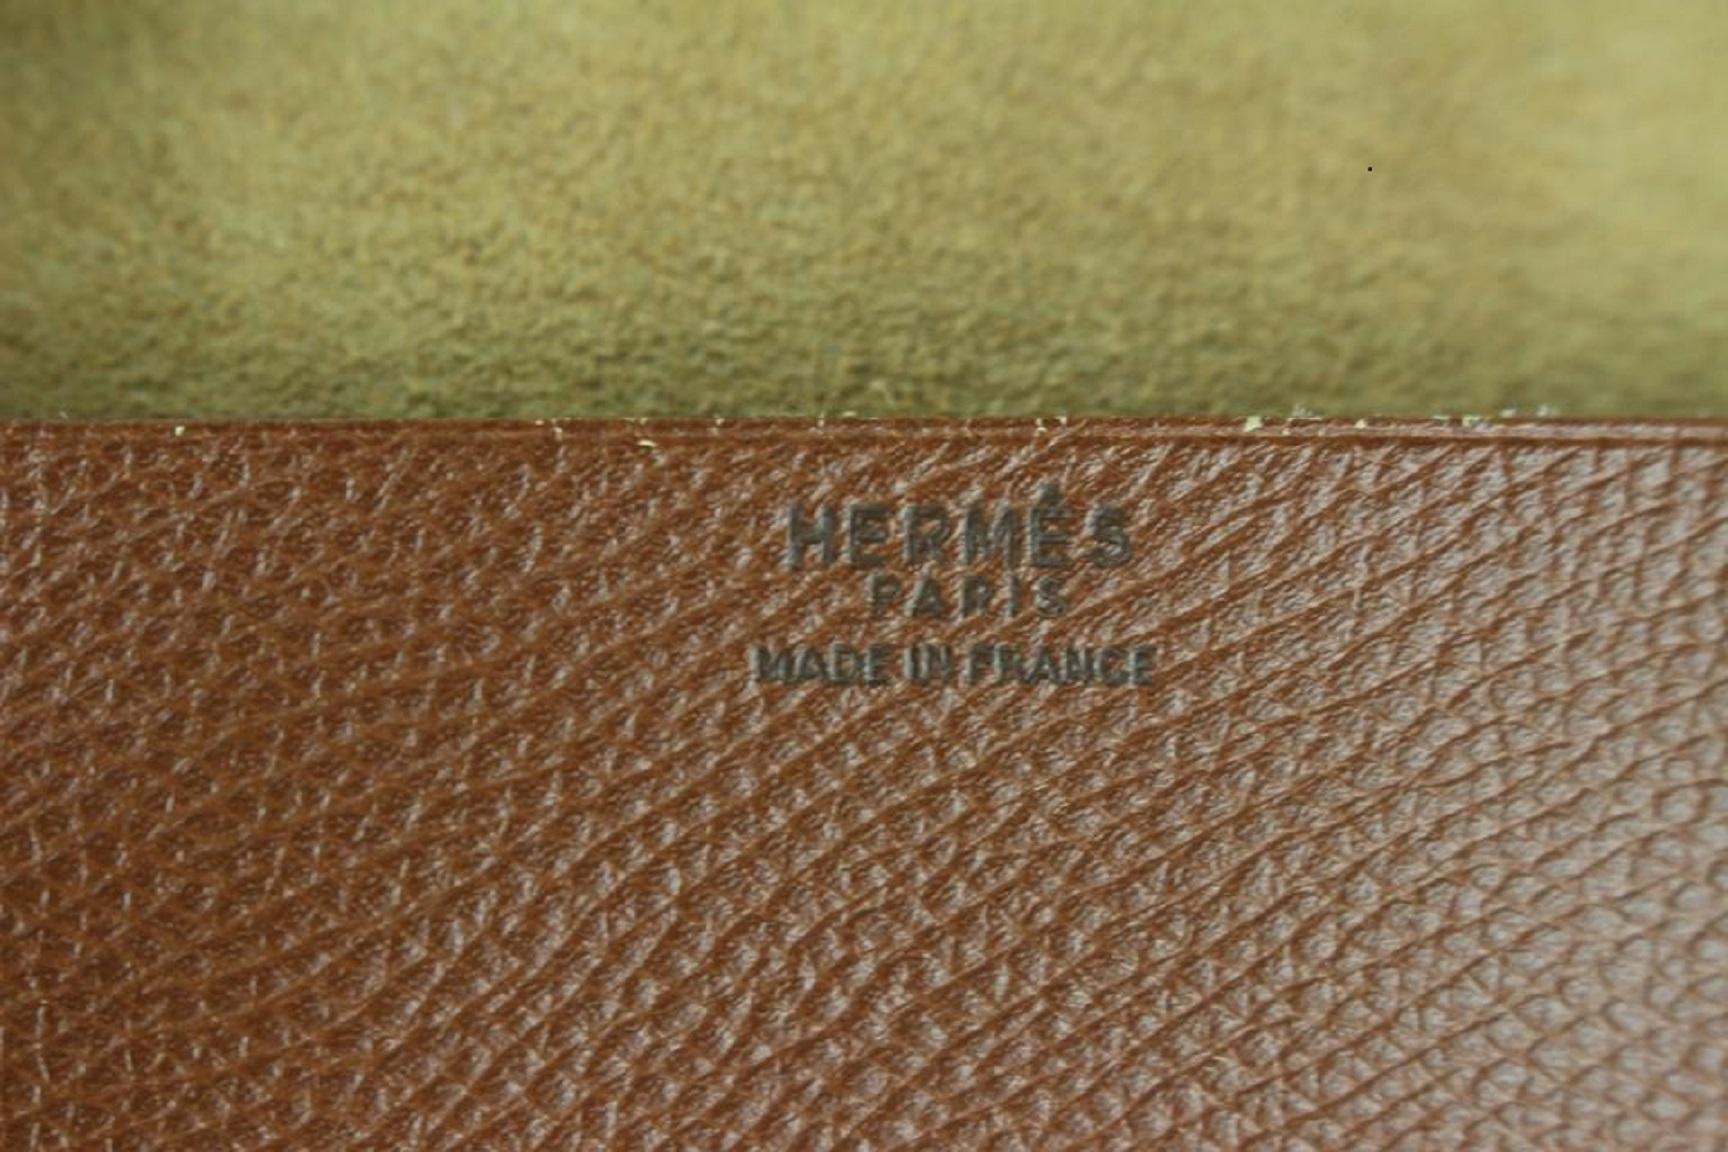 Hermès Pochette Green Fanny Pack Waist Pouch 12hz1130 Brown Leather Clutch In Good Condition For Sale In Dix hills, NY